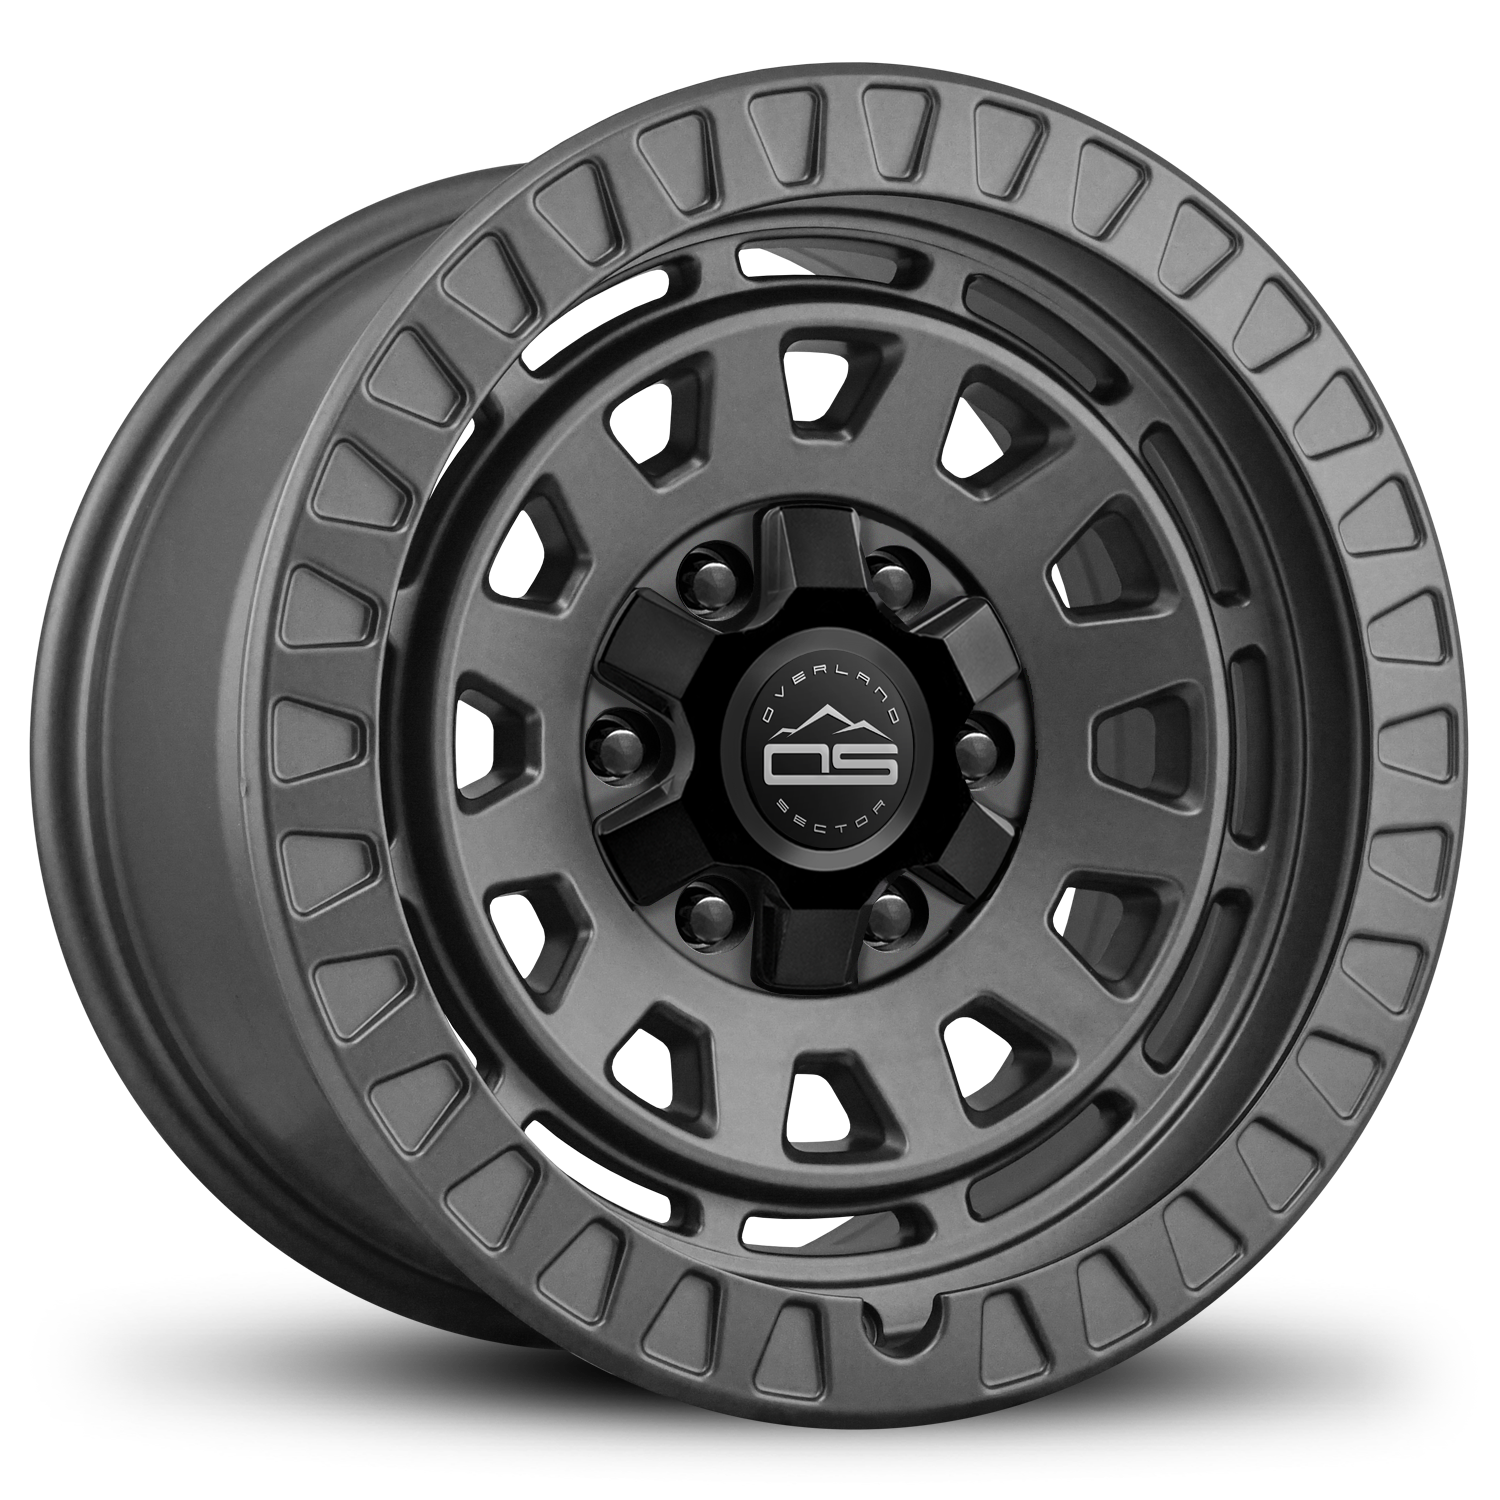 HD Off-Road Overland Sector Adventure Outdoor Life Style Wheel Rims for Ford F-150 Raptor, Toyota 4-Runner, Tacoma, FJ Cruiser, Lexus GX in 17x9.0 Inch All Satin Gray 6x135 & 6x139.7